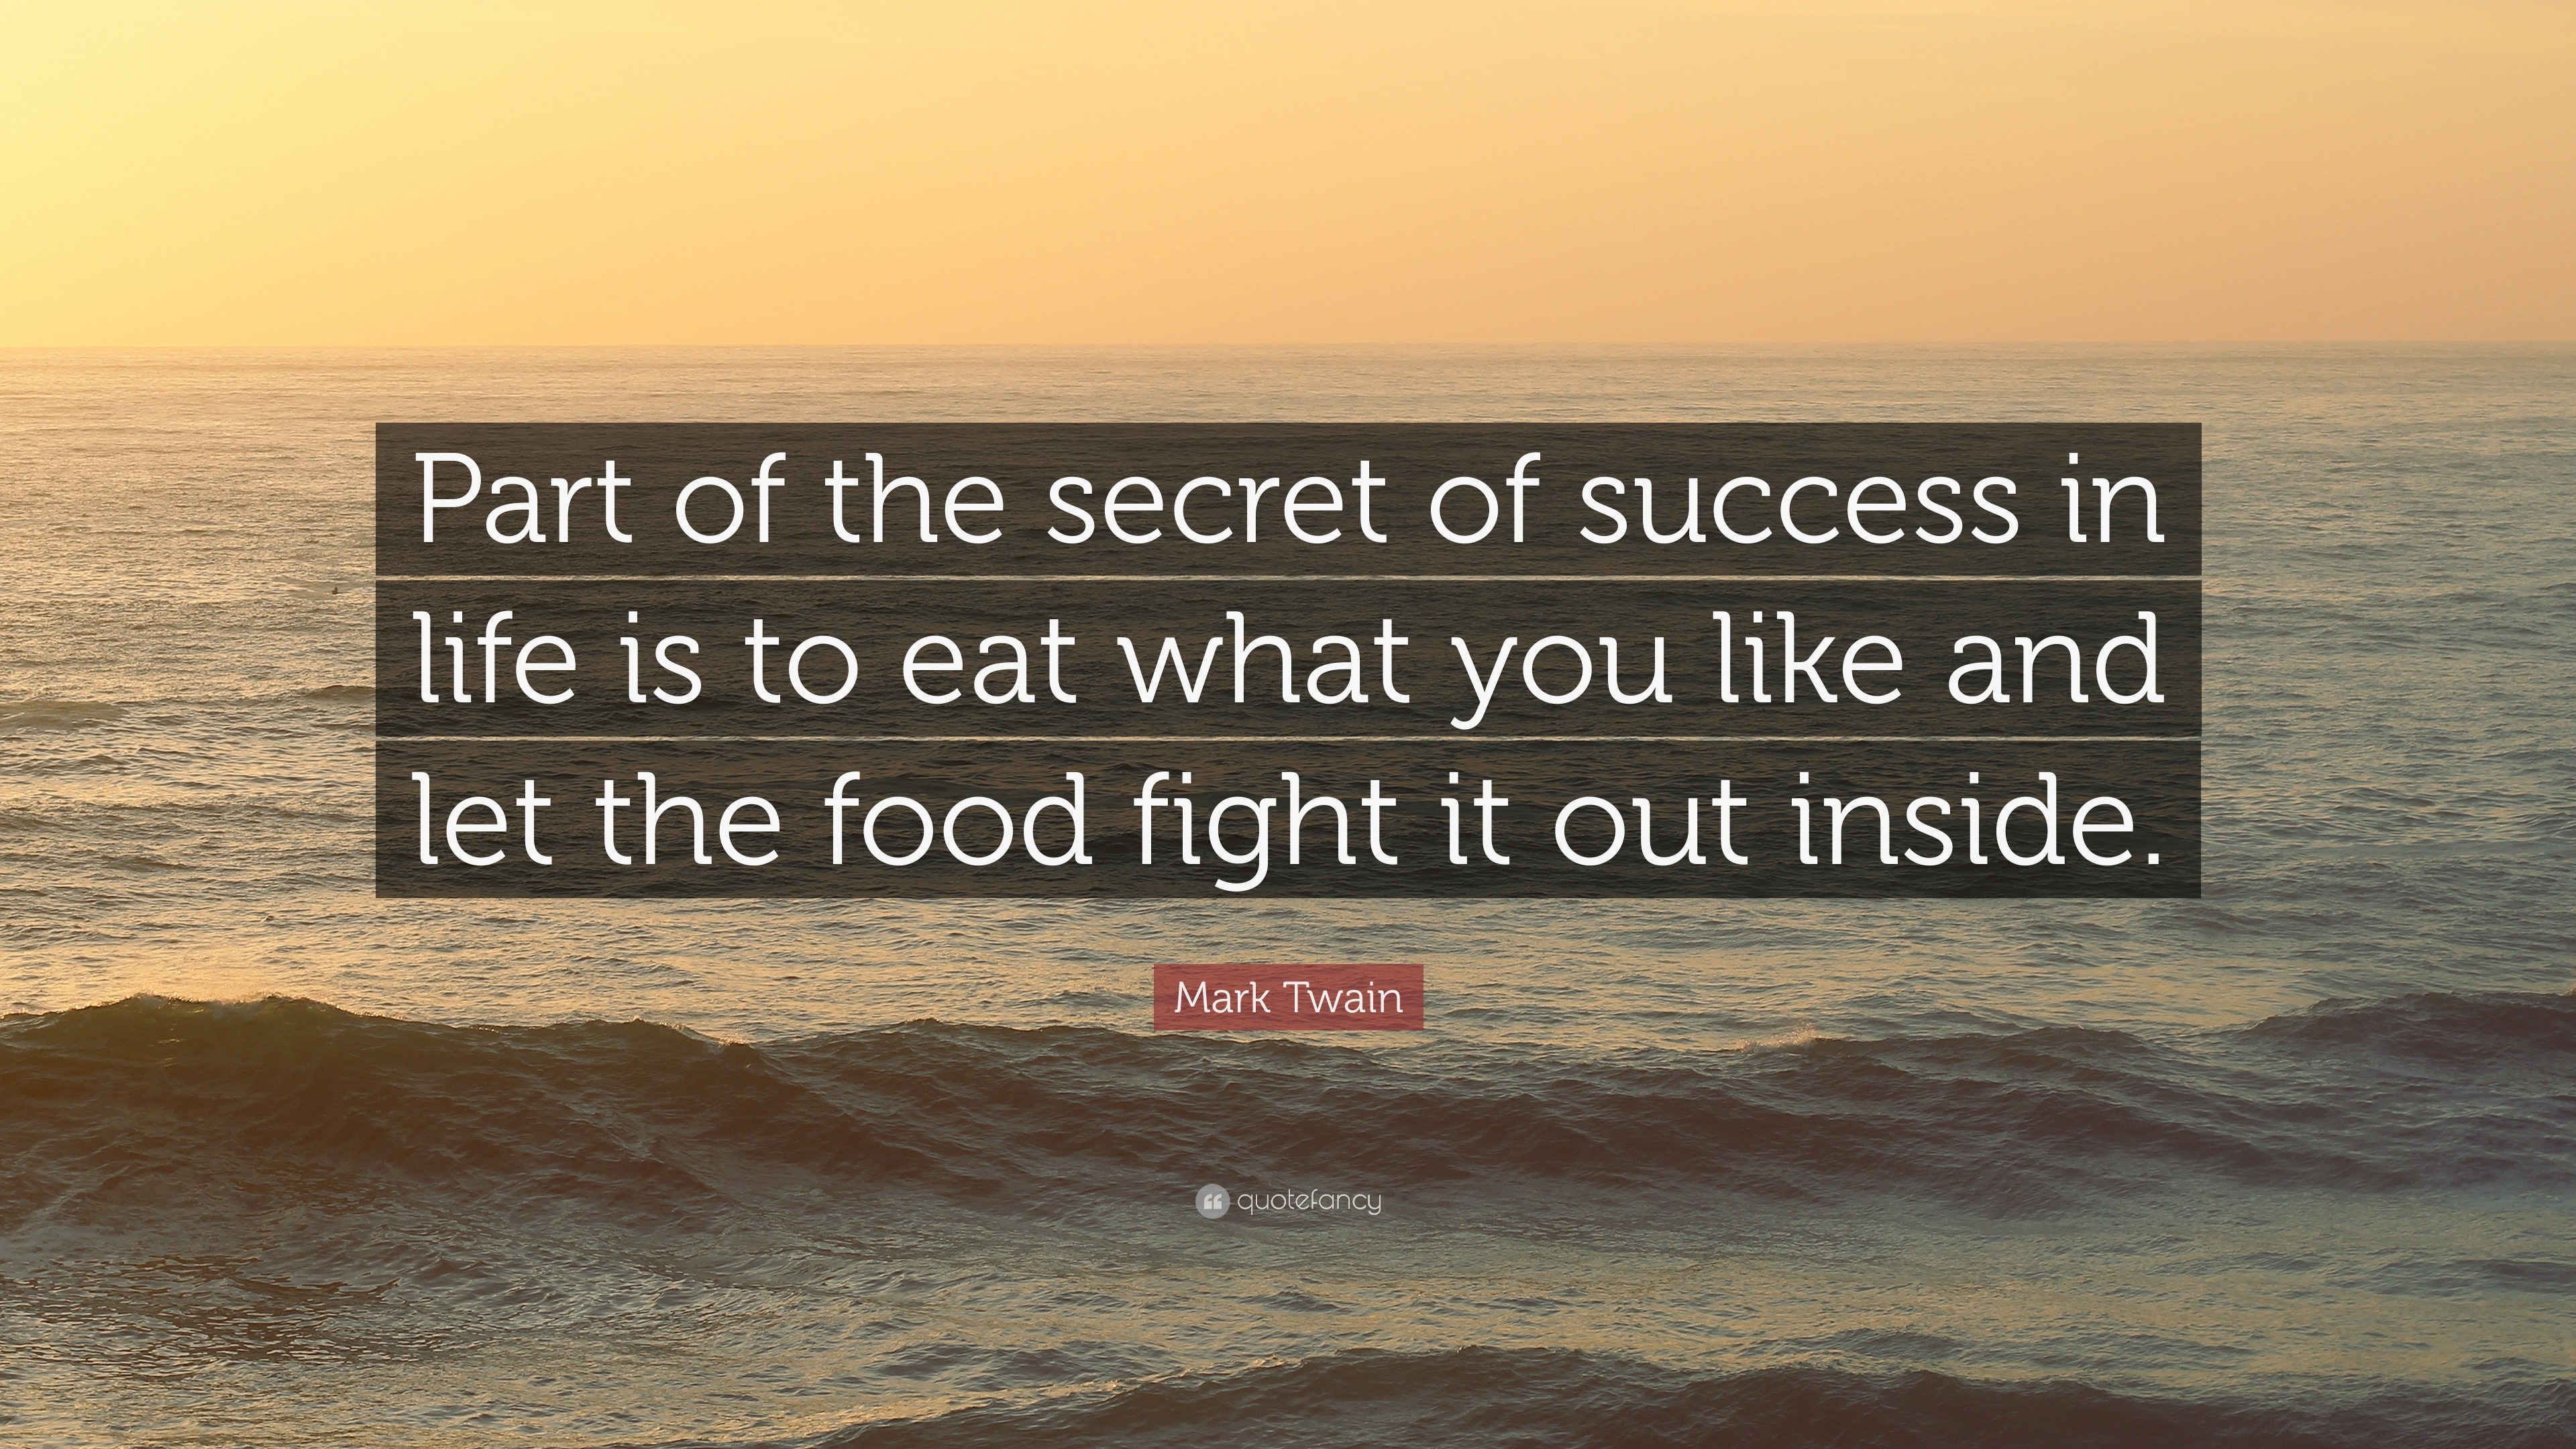 Mark Twain Quote “Part of the secret of success in life is to eat